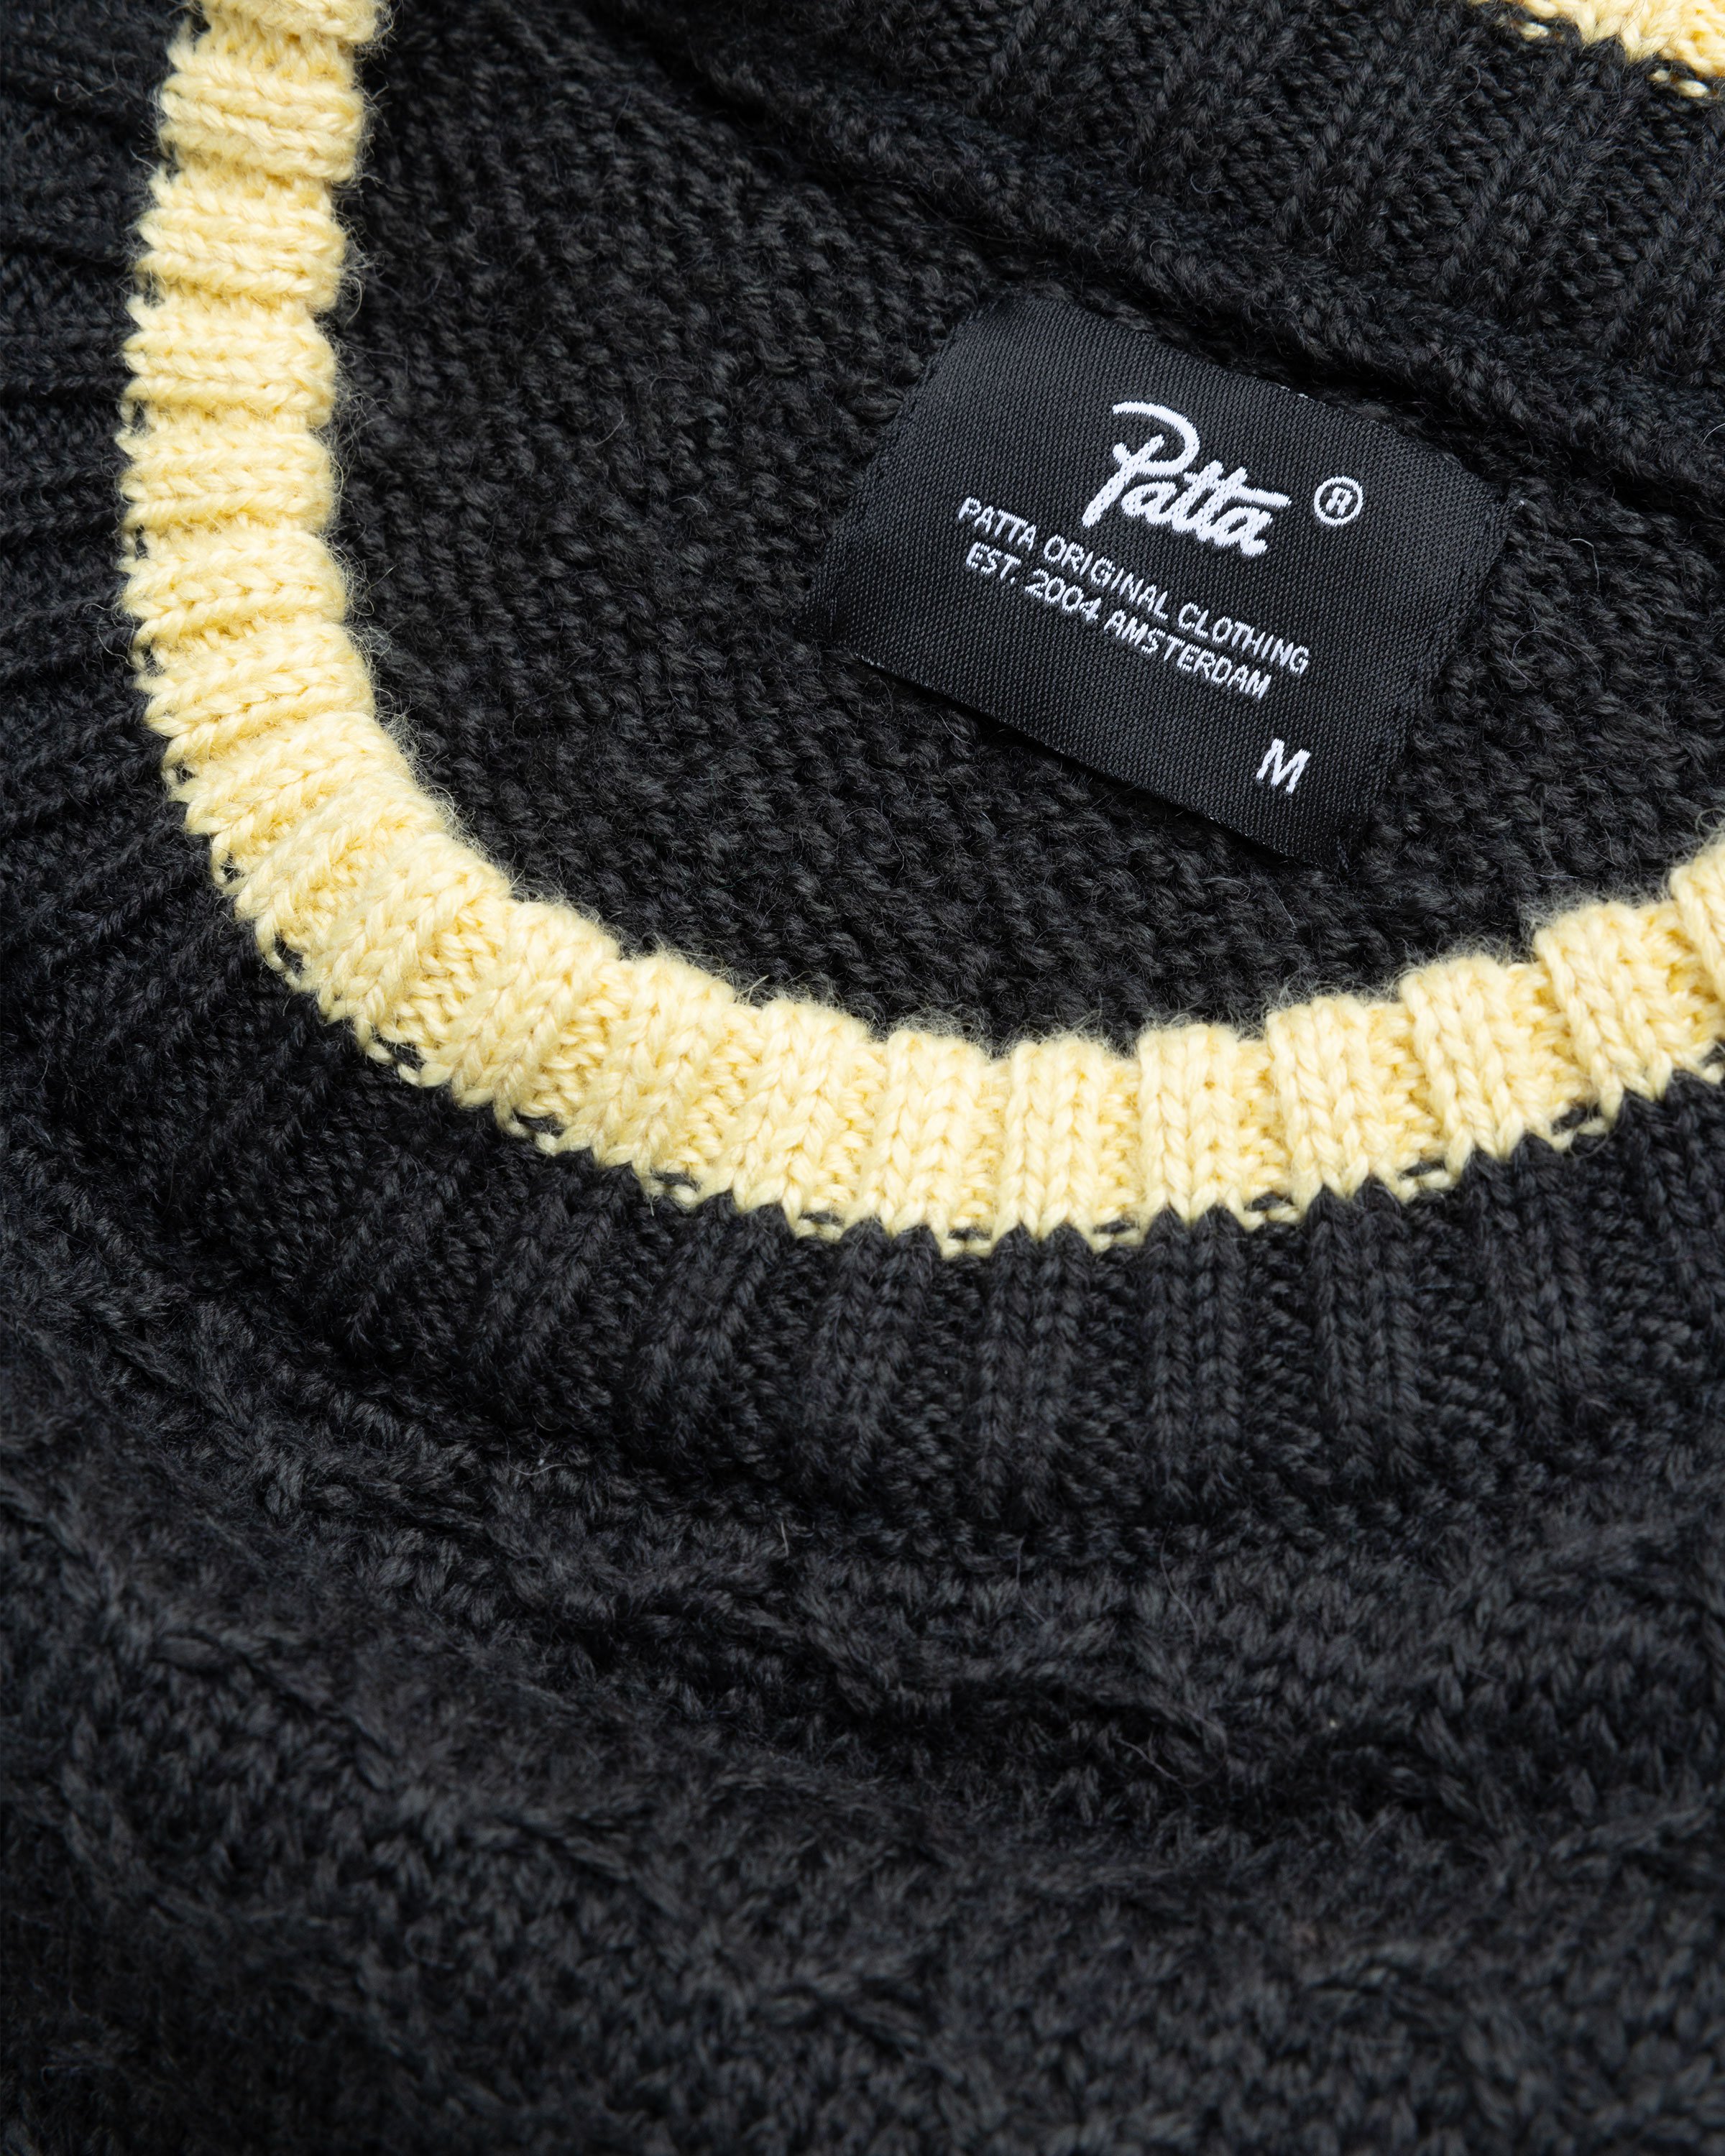 Patta - LOVES YOU CABLE KNITTED SWEATER Black - Clothing - Black - Image 6